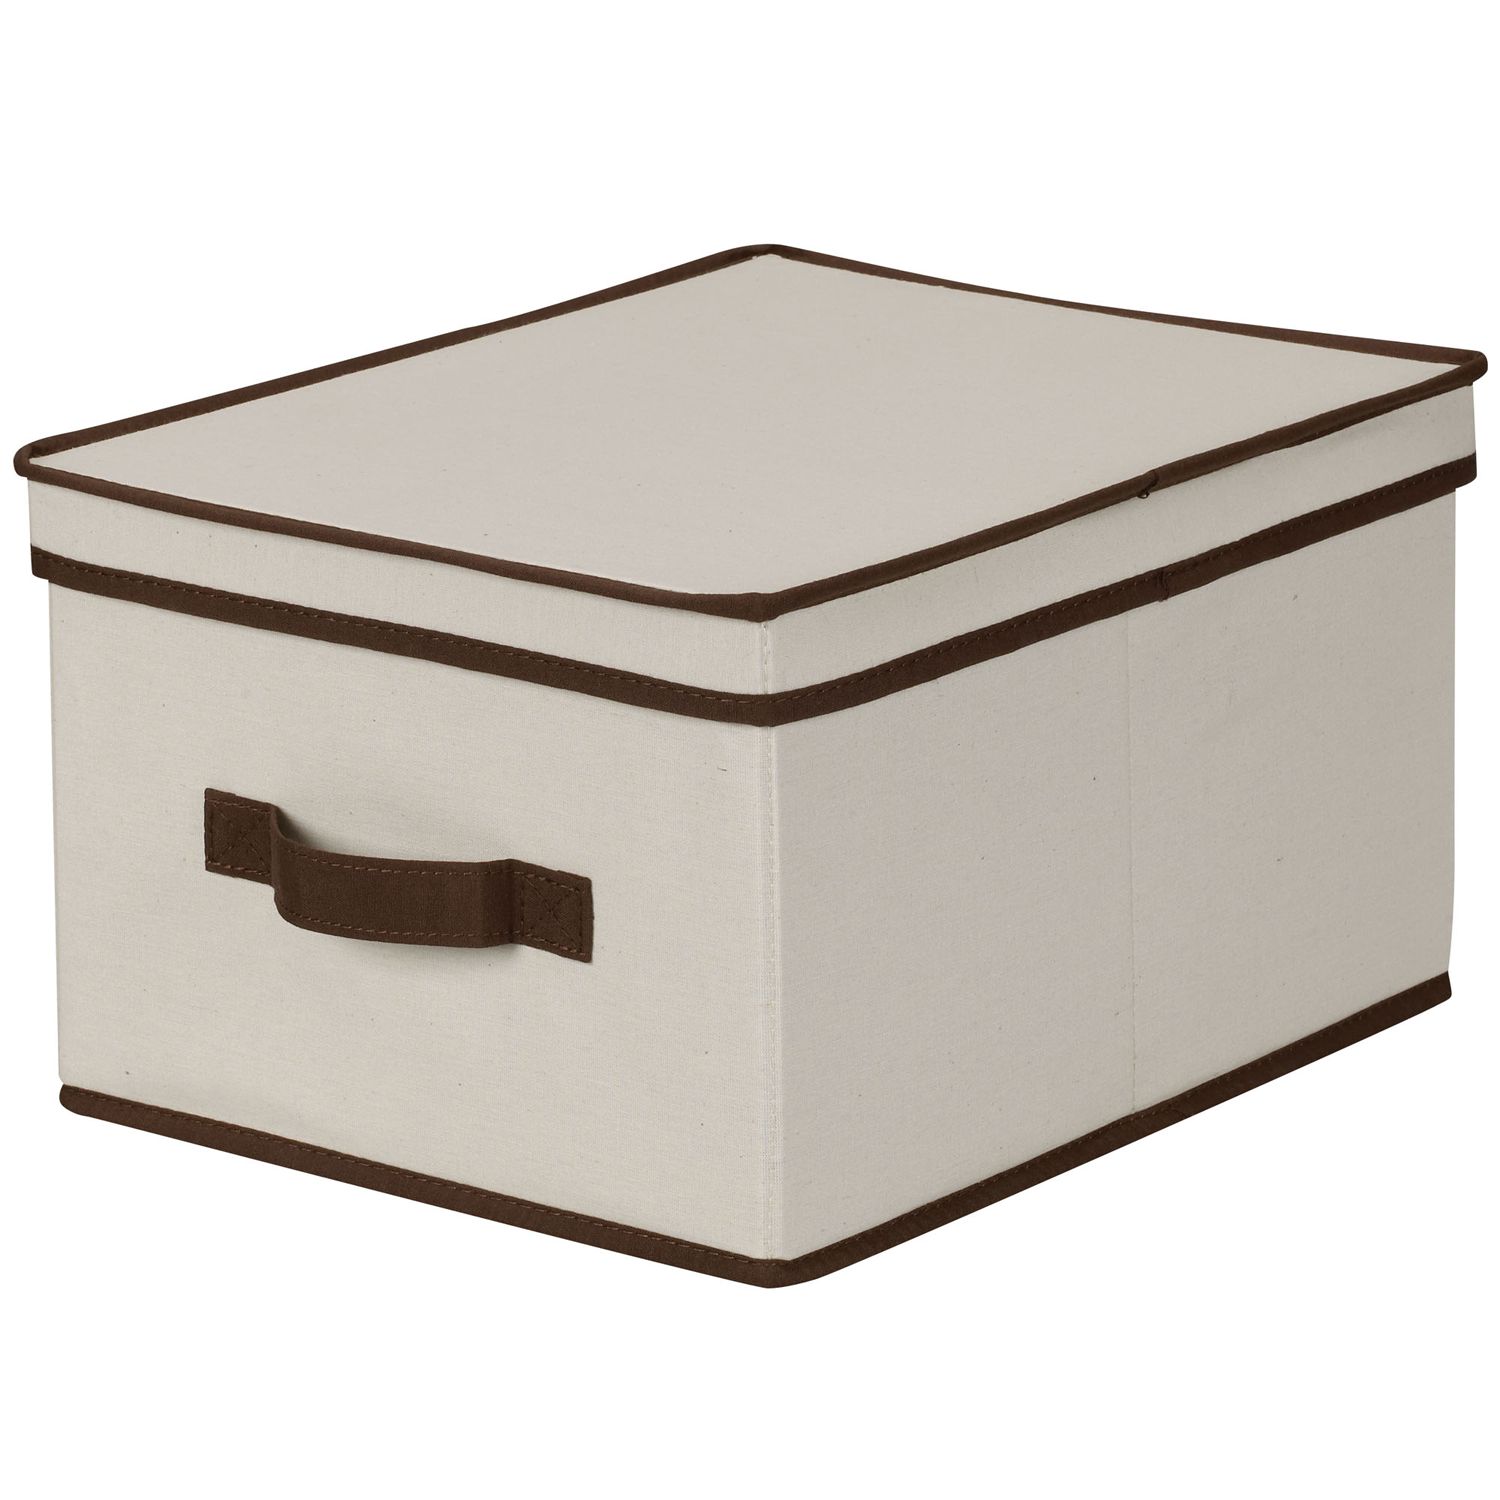 Image for Household Essentials Lidded Storage Box at Kohl's.